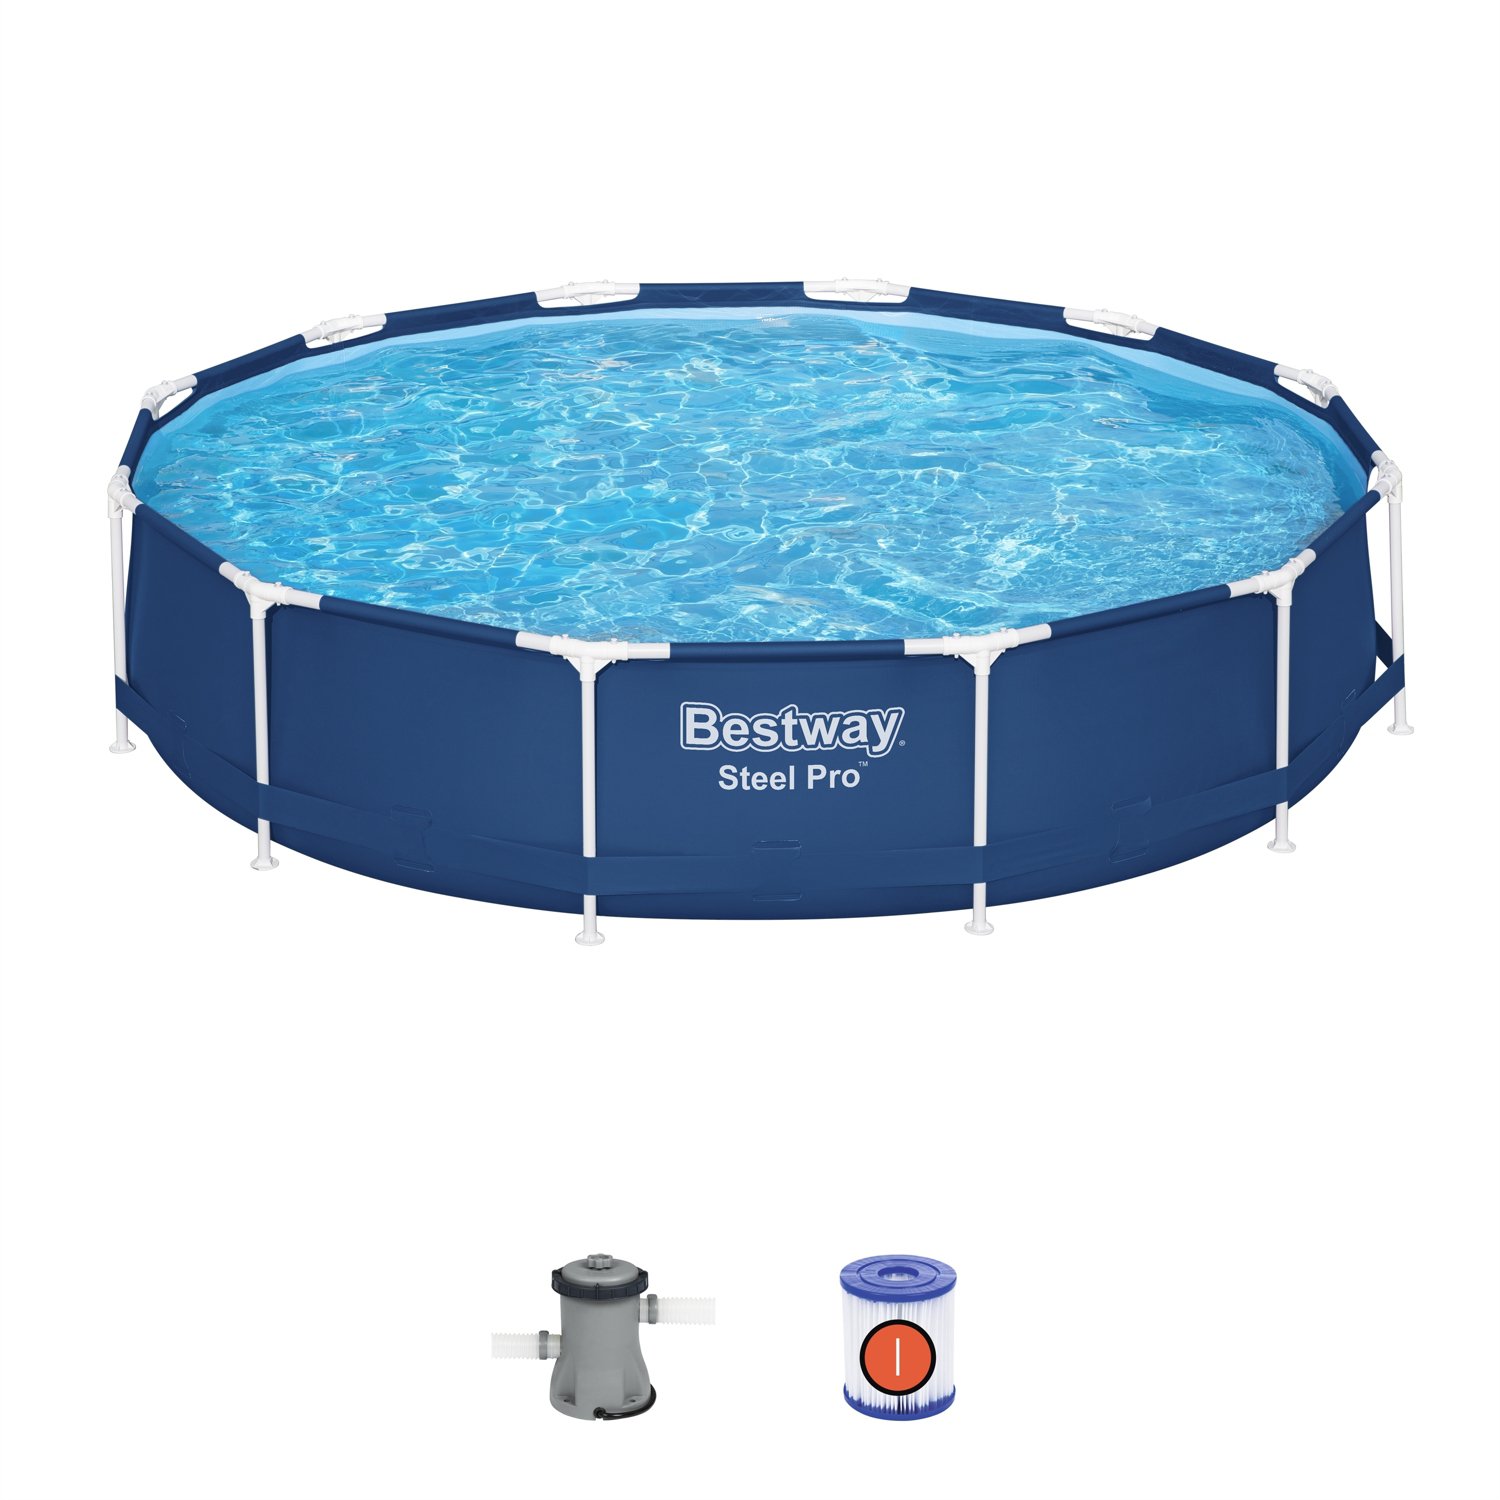 Bestway Steel Pro 12 ft x 30 in Above Ground Pool Set                                                                            - view number 1 selected